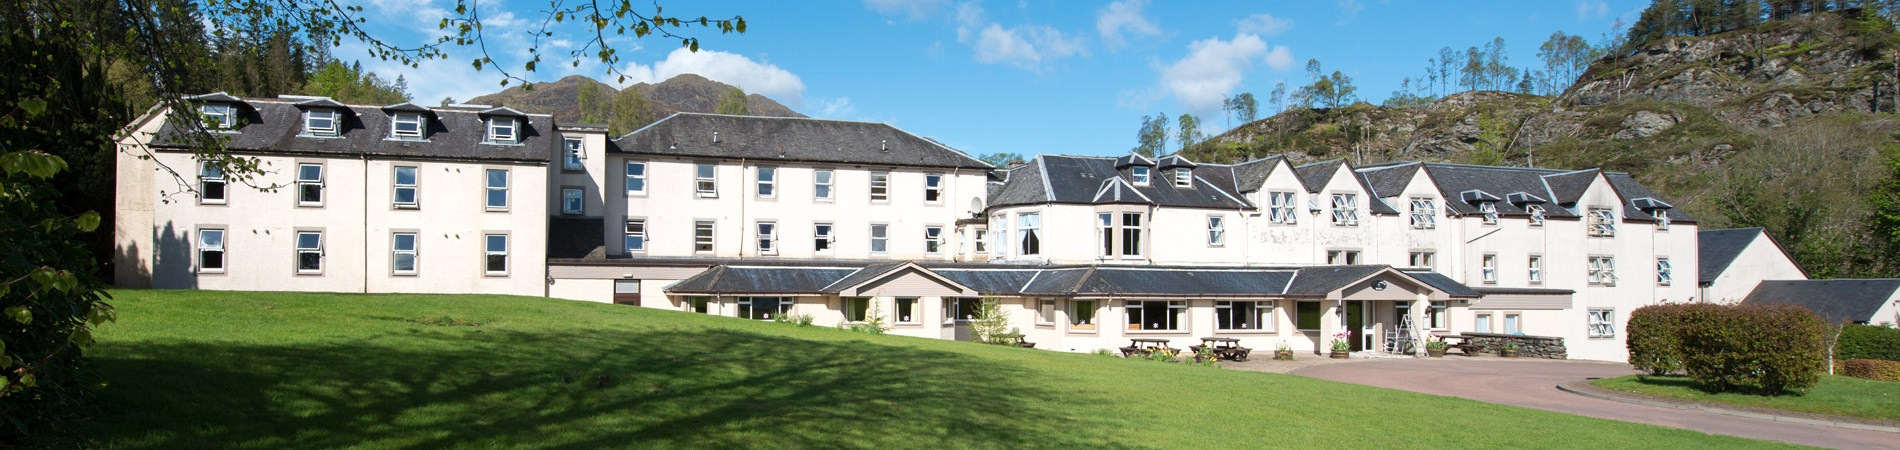 The Loch Achray Hotel is the perfect hub to explore everything Scotland has on offer when on a Scottish Coach Tour.